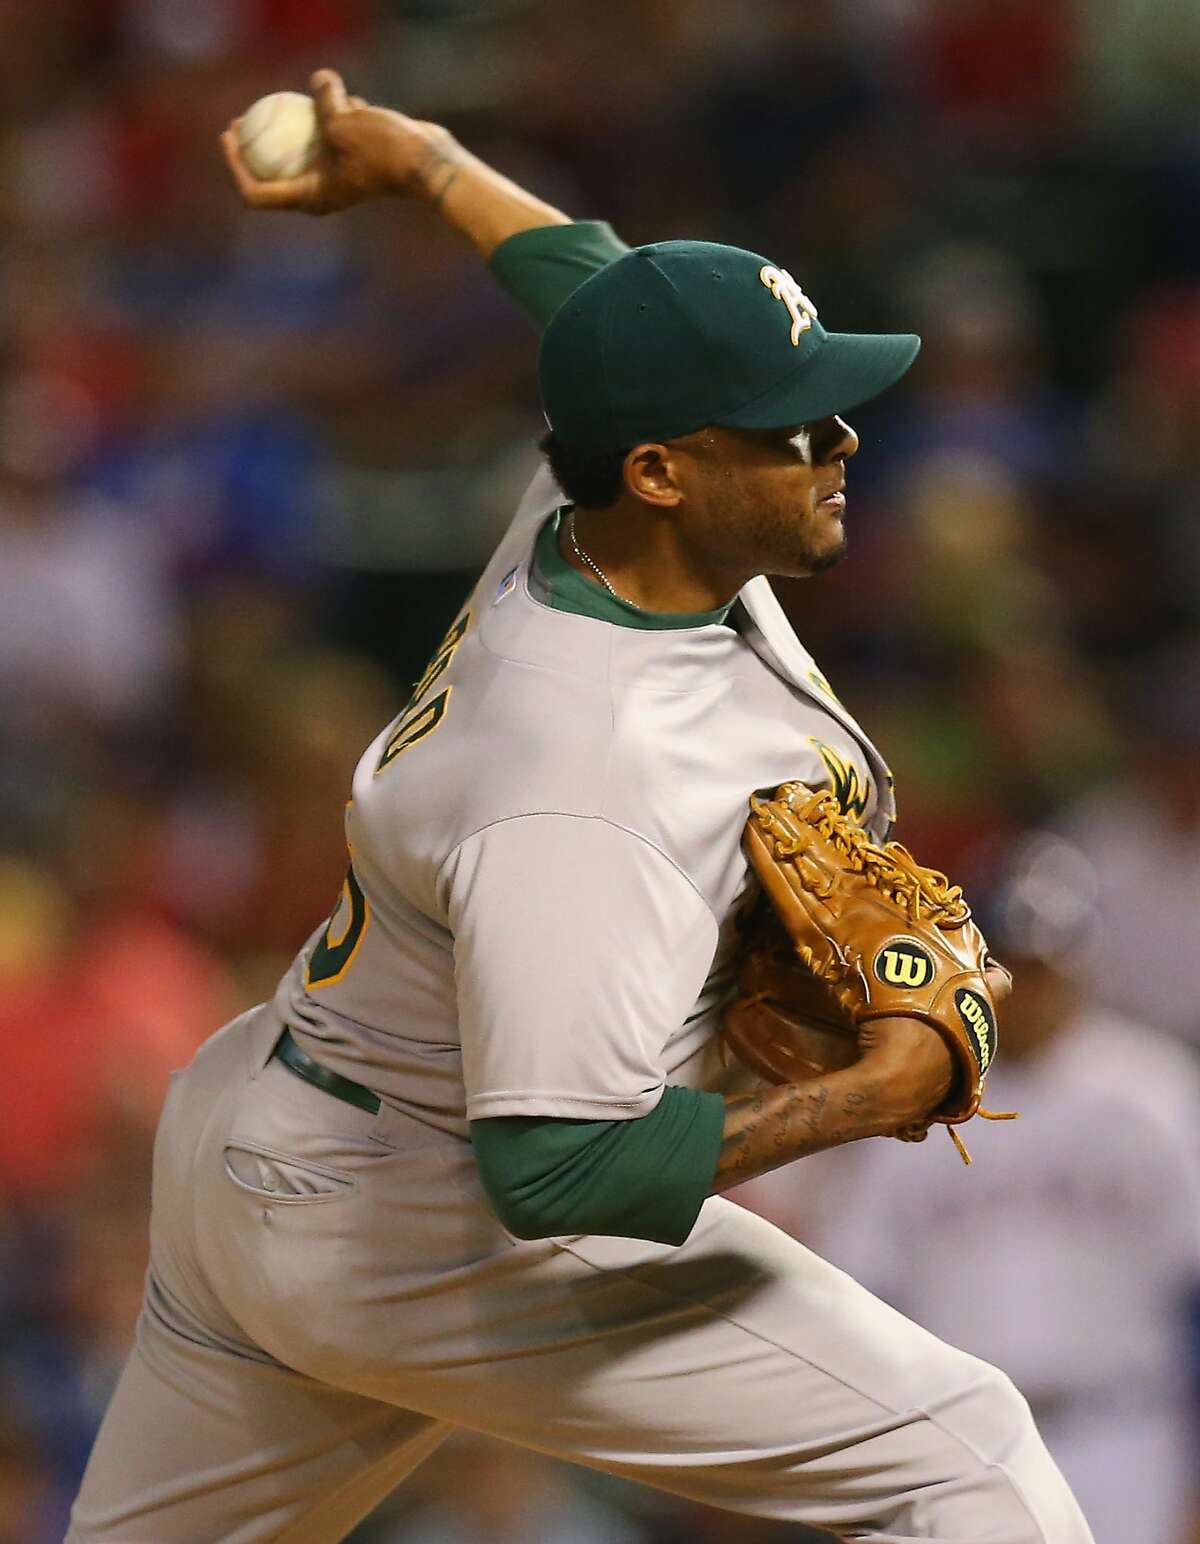 ARLINGTON, TX - MAY 01: Fernando Abad #56 of the Oakland Athletics throws against the Texas Rangers in the seventh inning at Globe Life Park in Arlington on May 1, 2015 in Arlington, Texas. (Photo by Ronald Martinez/Getty Images)